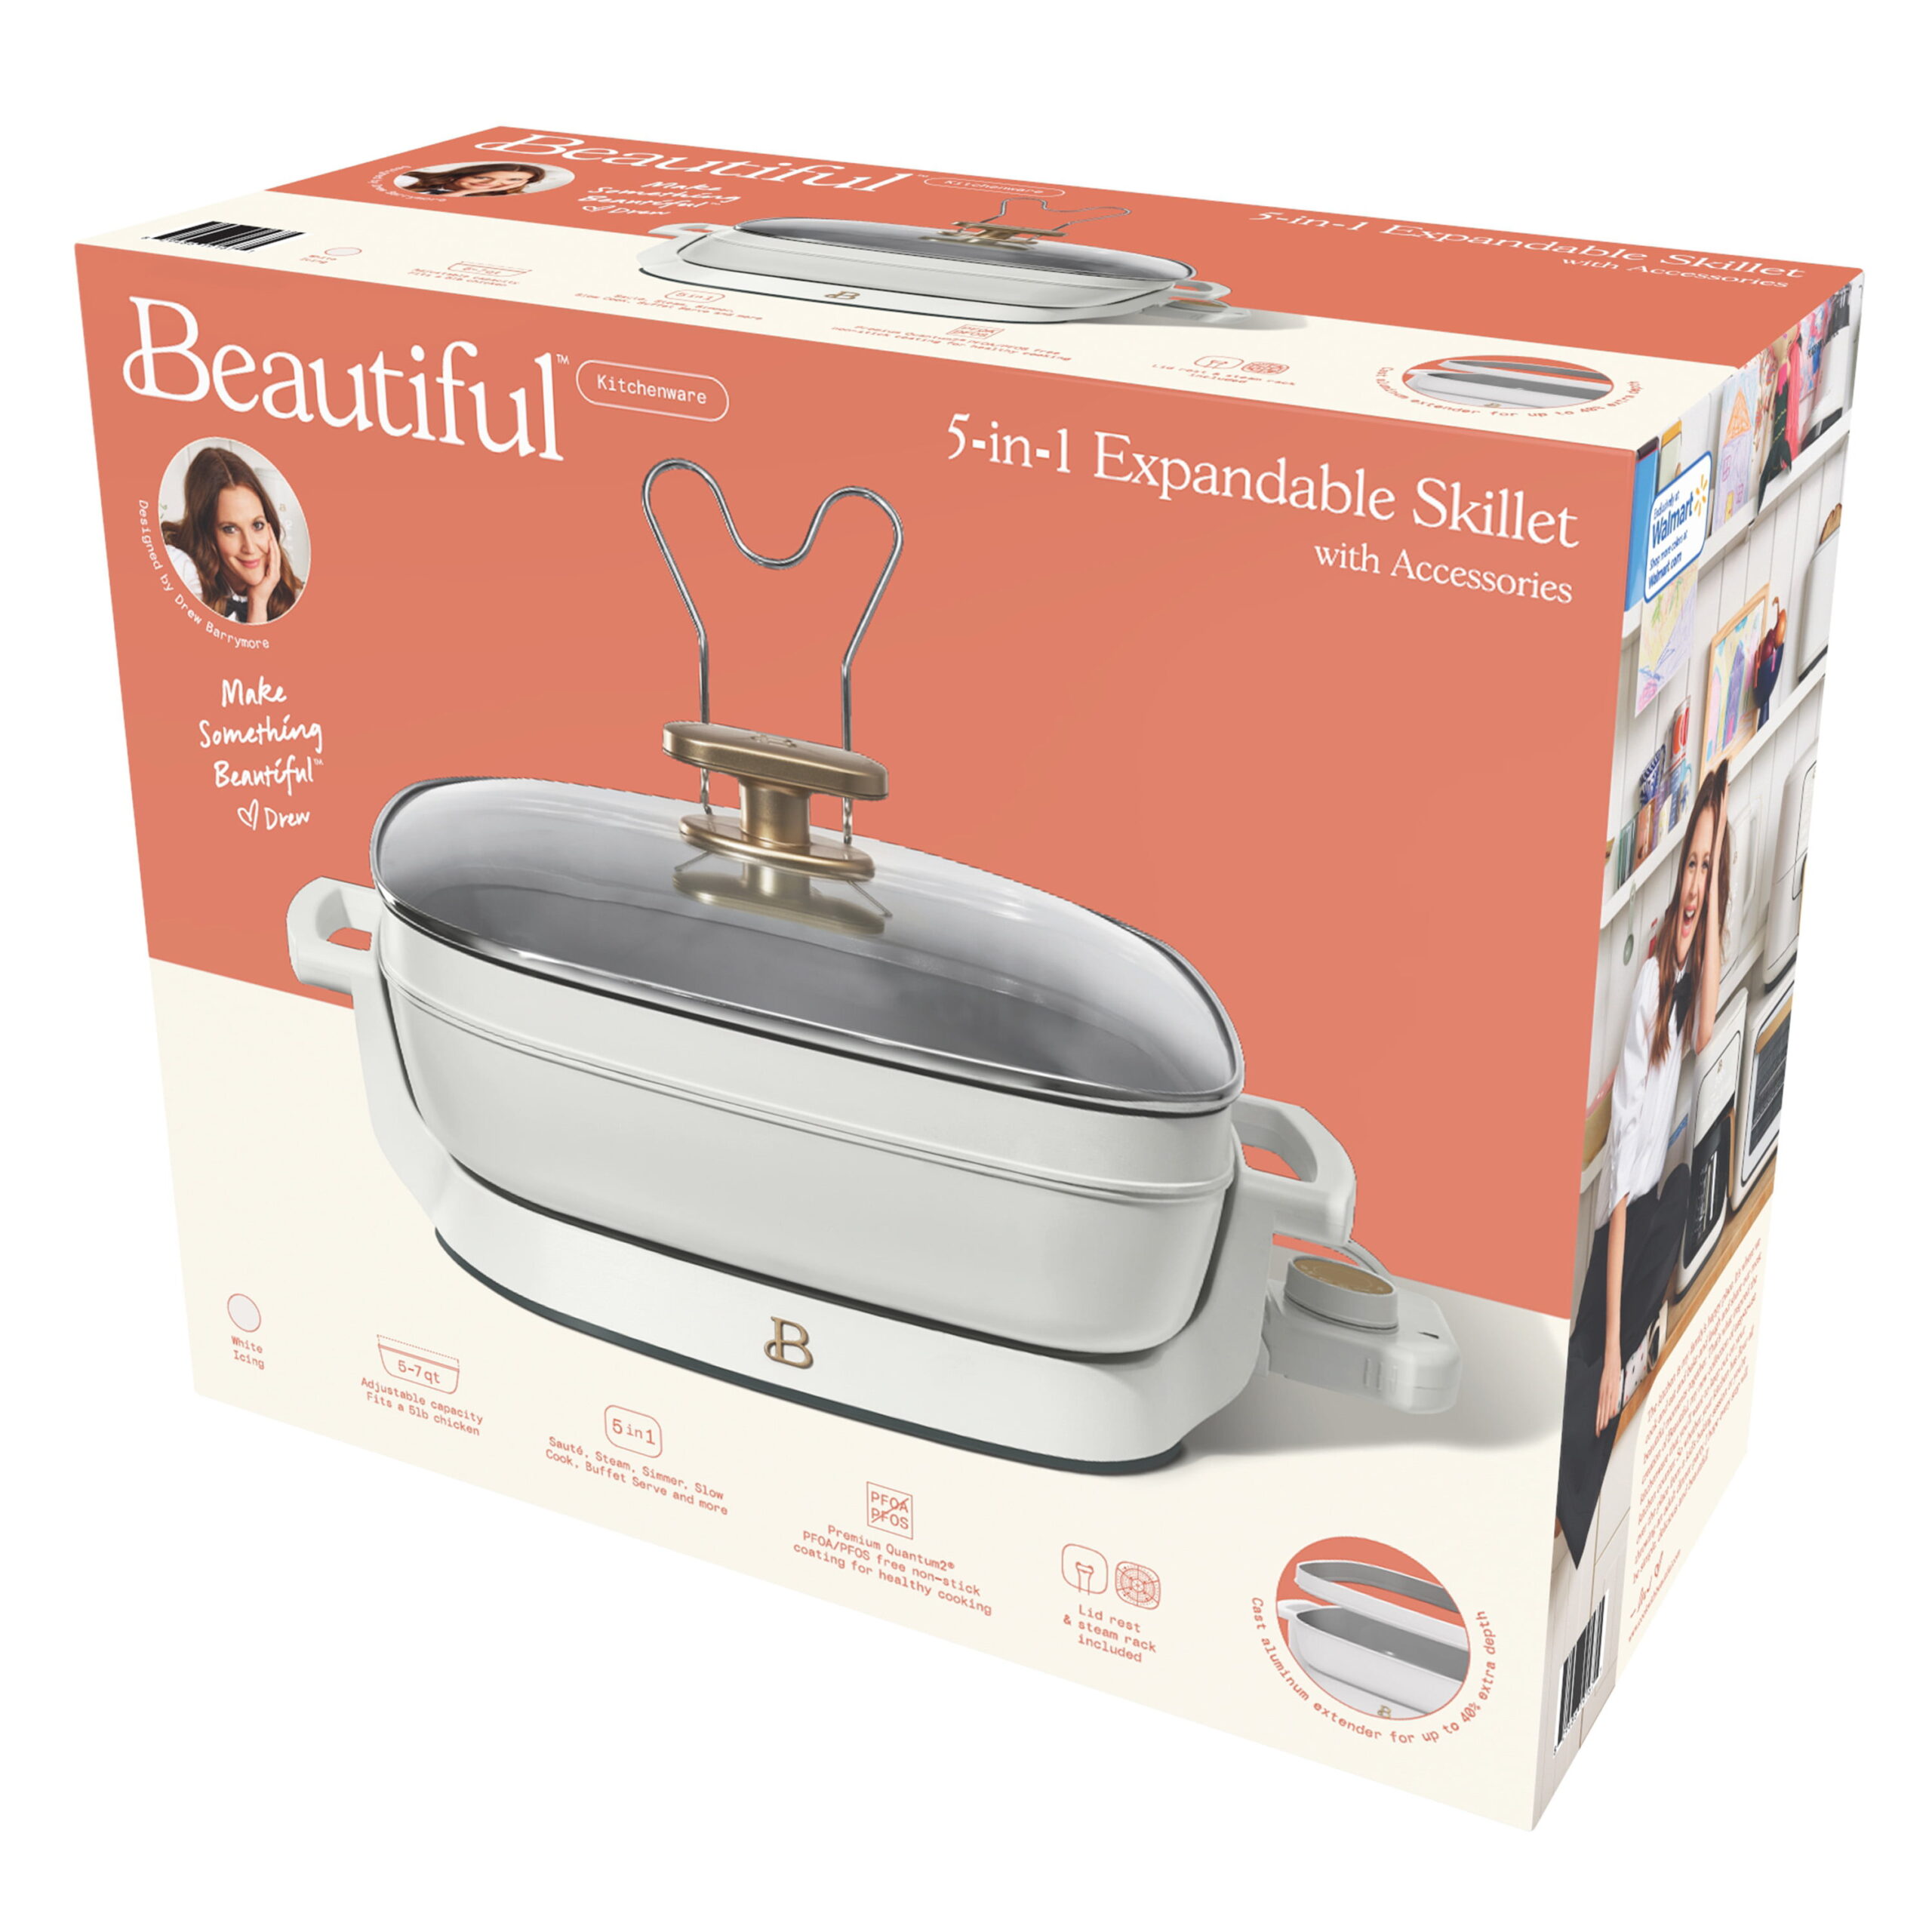 Beautiful 5 in 1 Electric Skillet - Expandable up to 7 Qt with